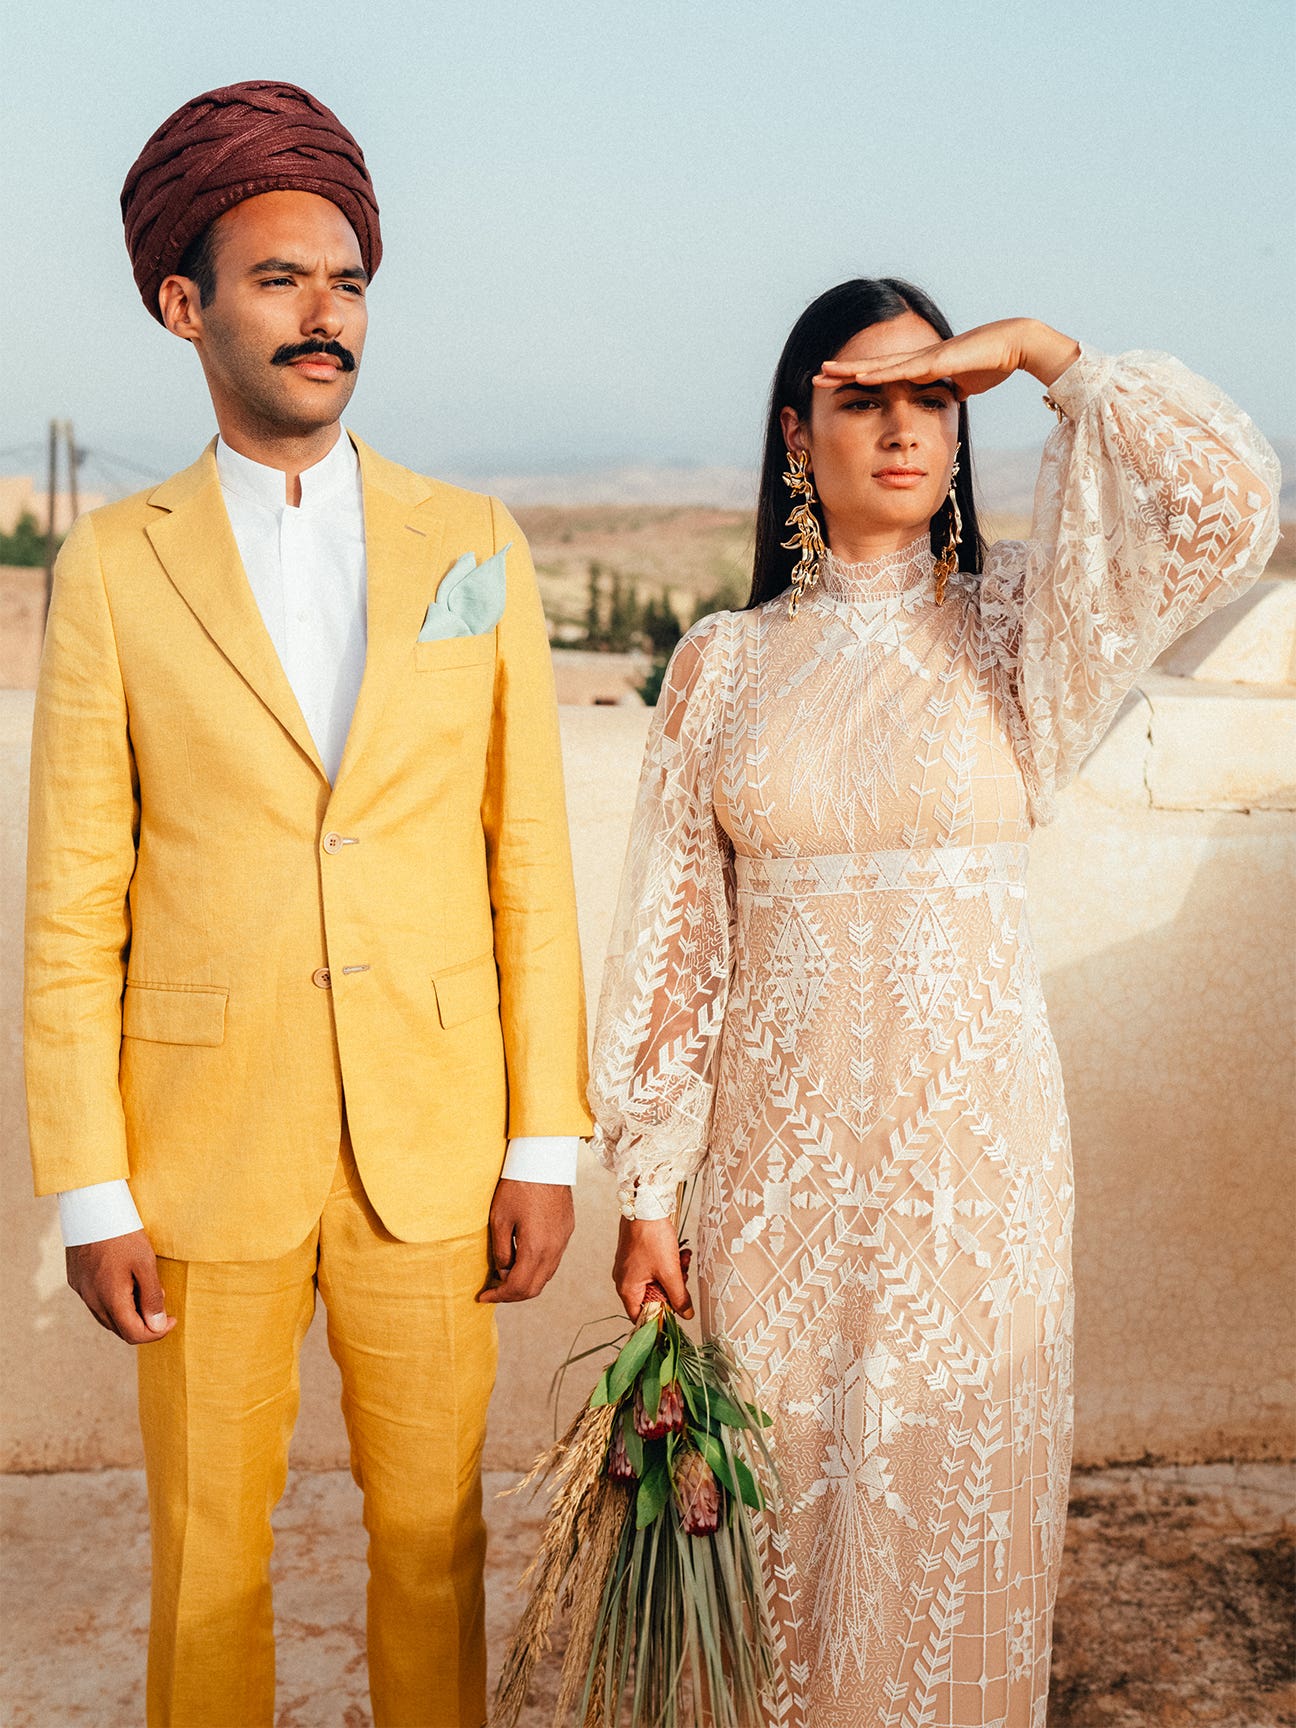 The Founder of LRNCE Said “I Do” in an Enchanting Moroccan Garden